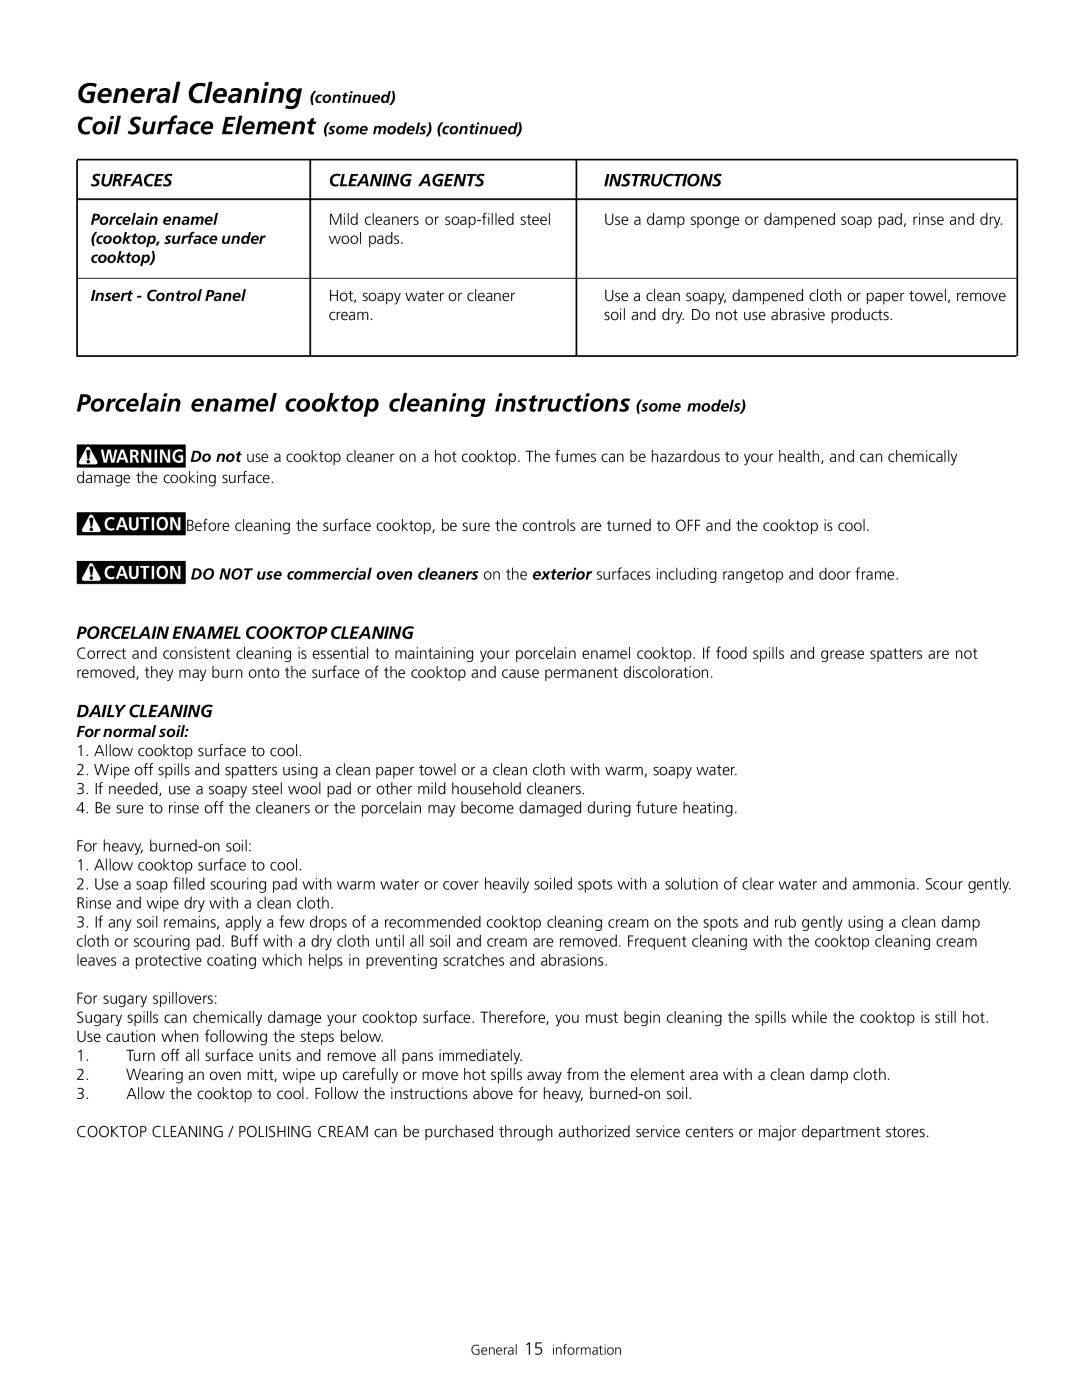 Frigidaire 318200805 Porcelain enamel cooktop cleaning instructions some models, Surfaces, Cleaning Agents, Instructions 